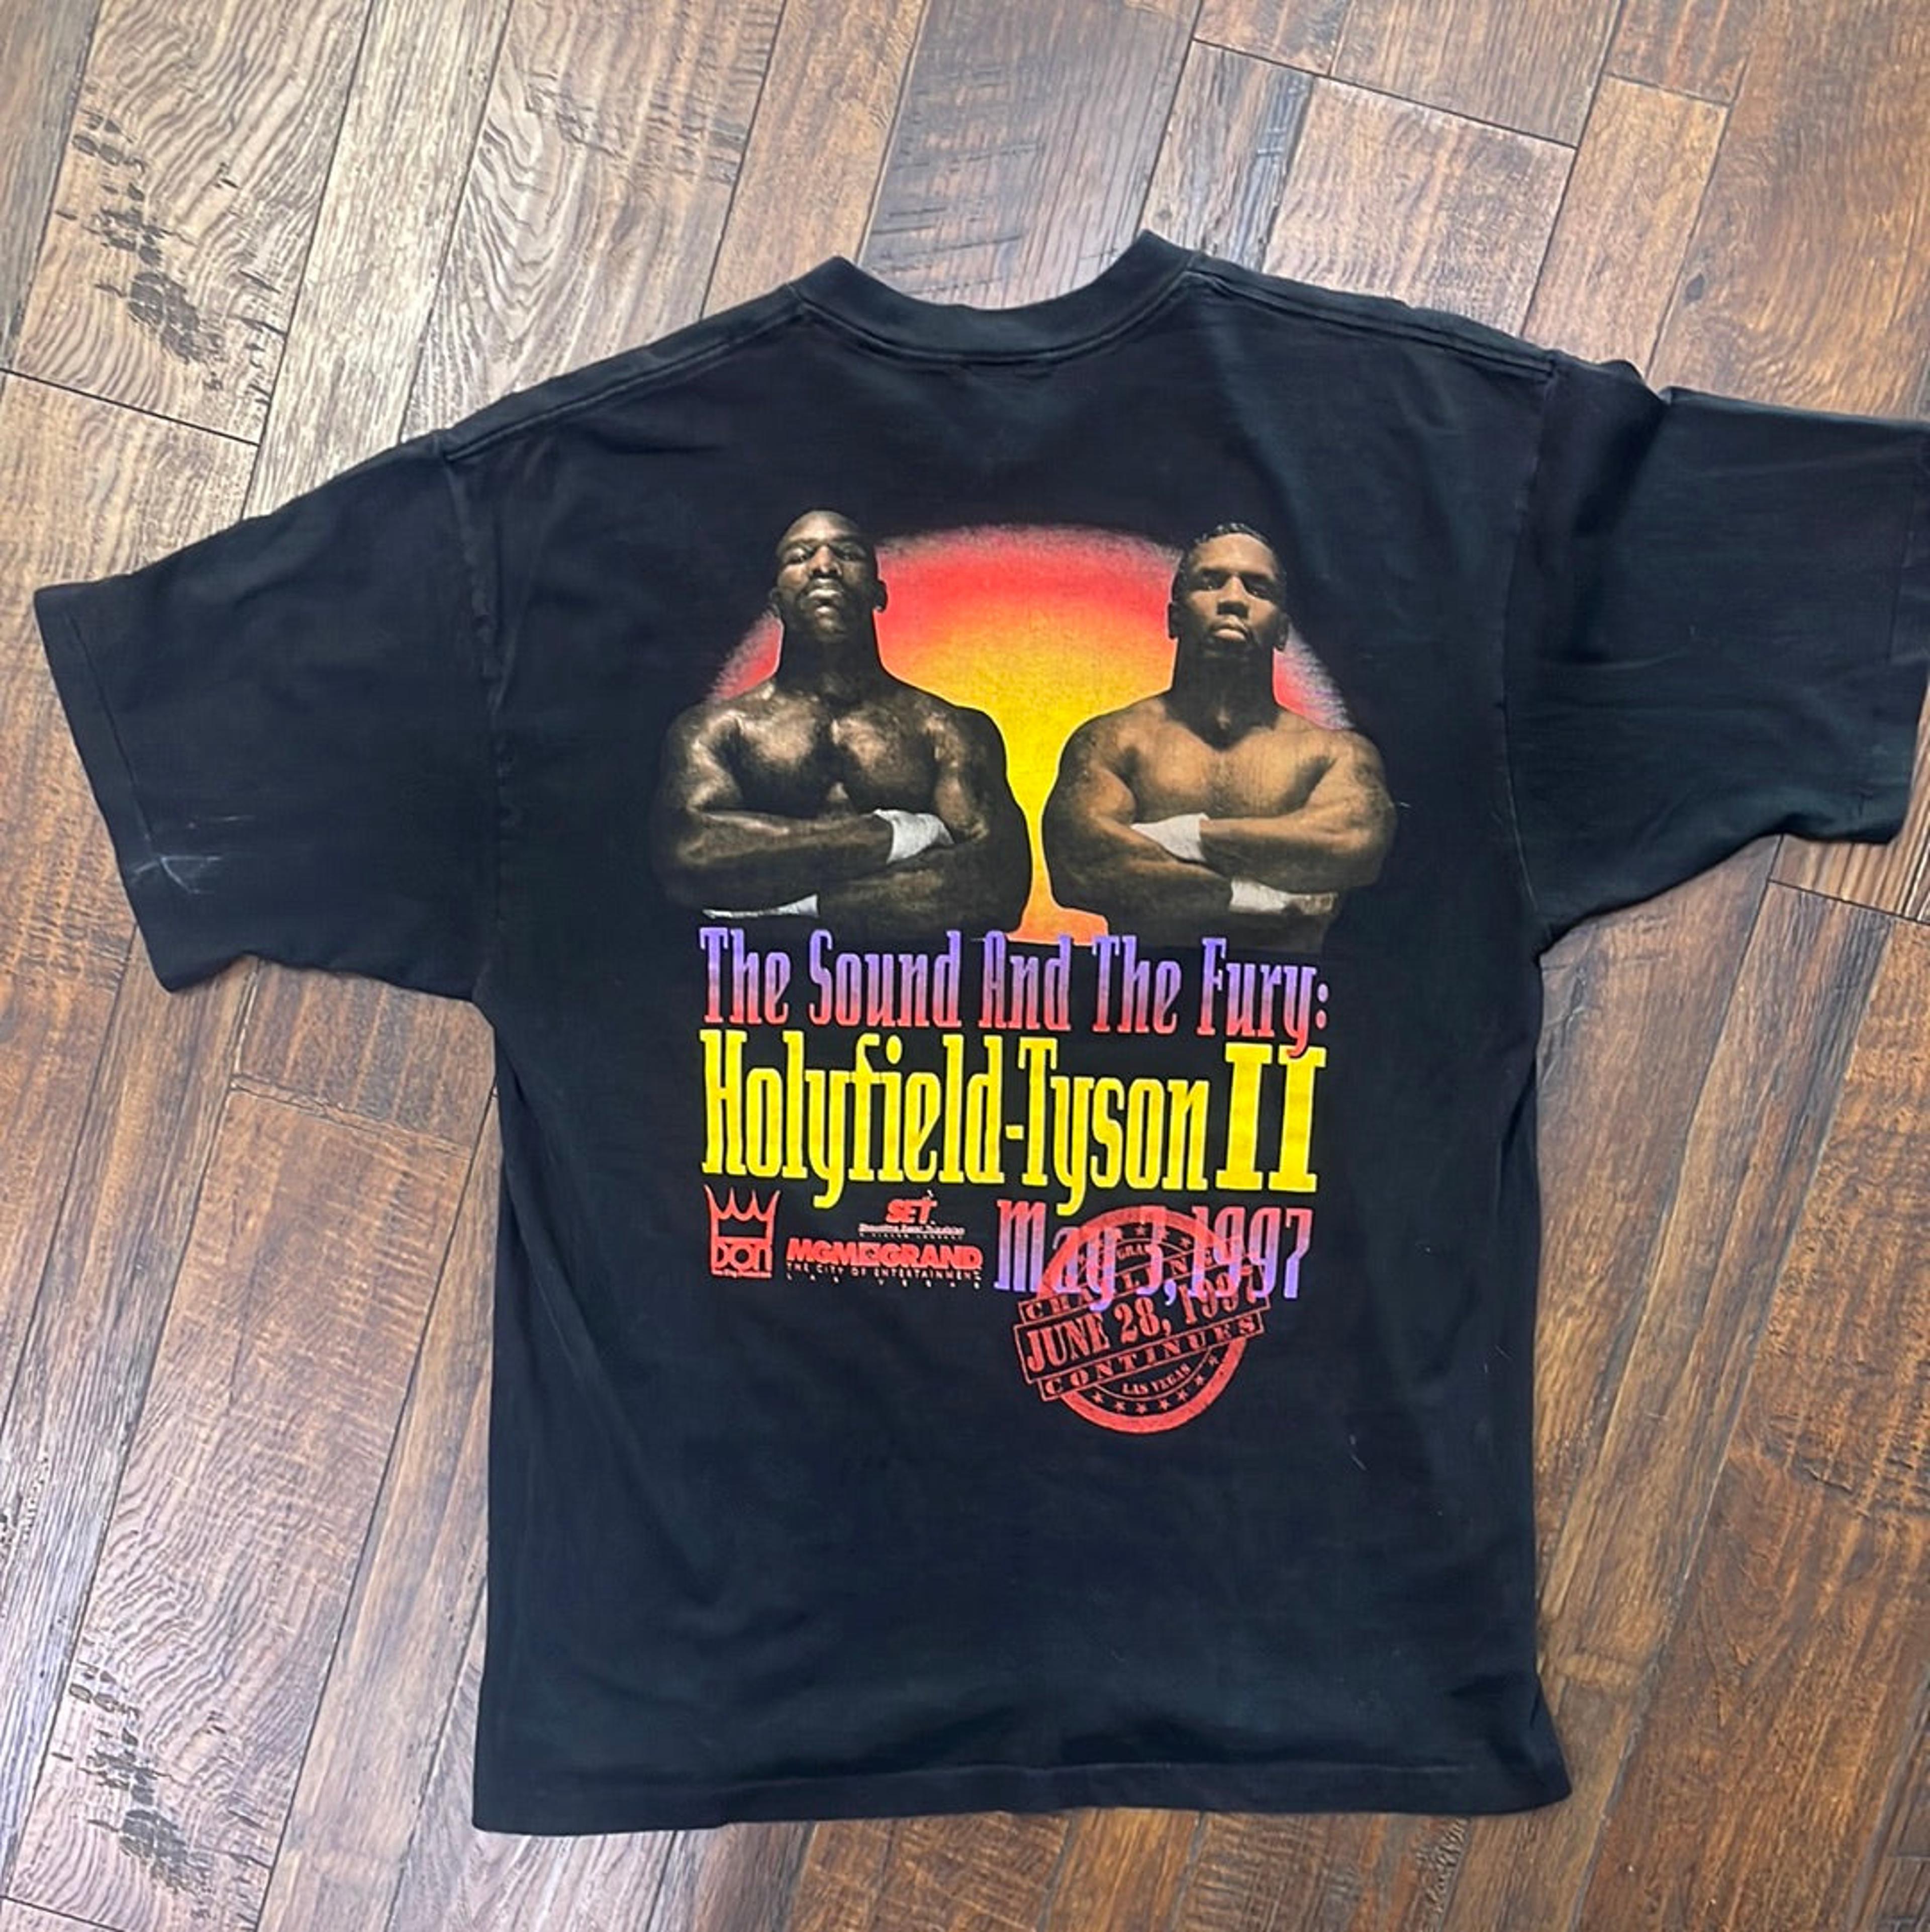 Vintage 1996 Mike Tyson vs Holyfield The Sound and the Fury MGM 